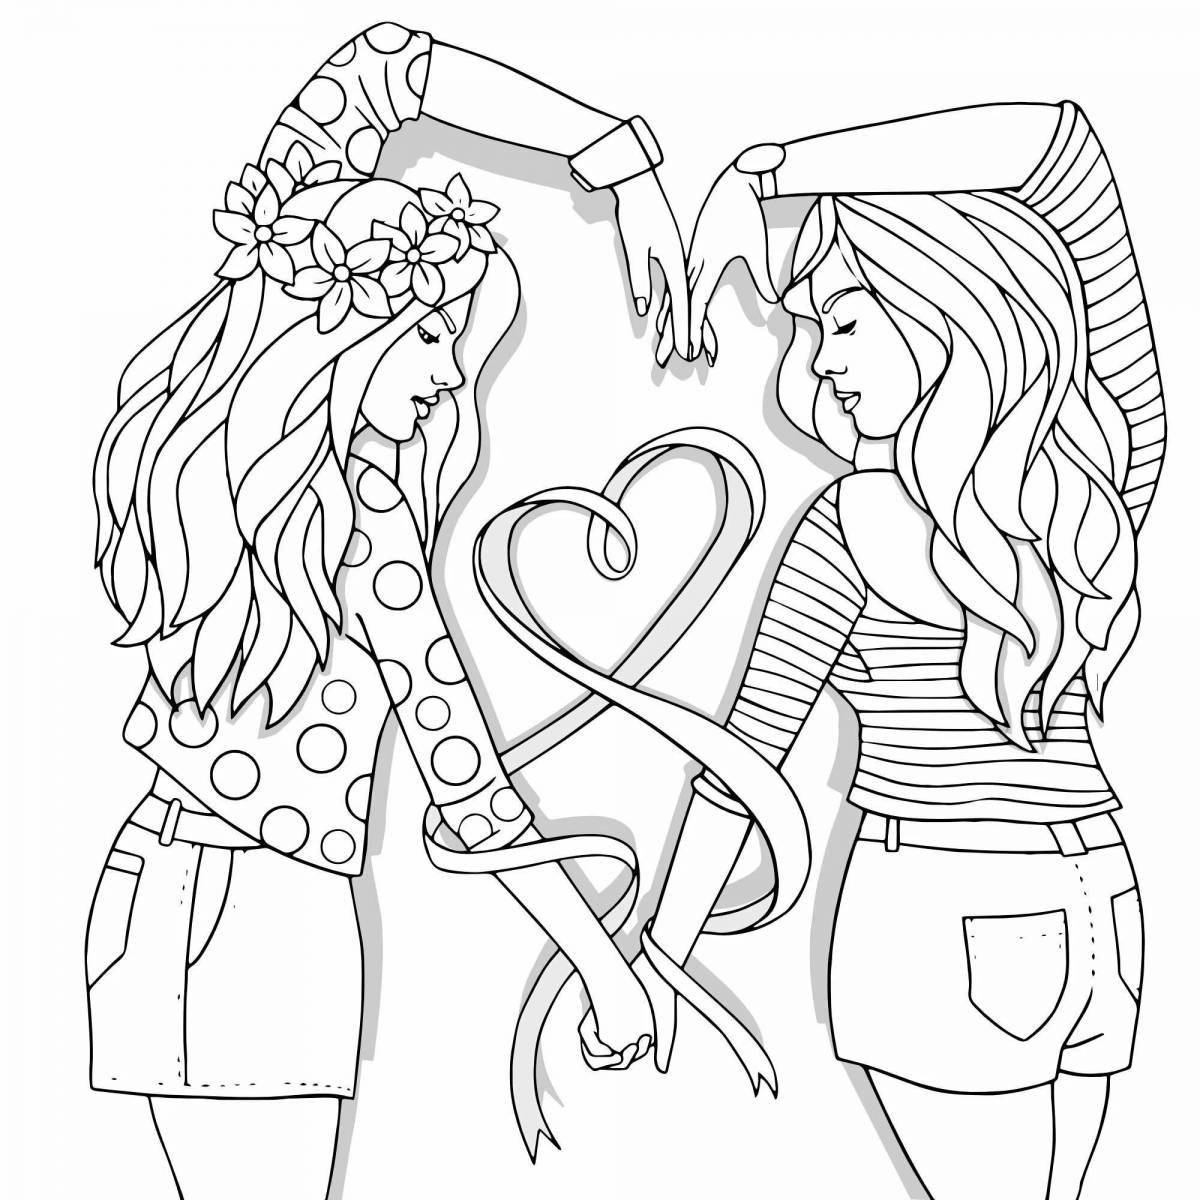 Happy two friends coloring page